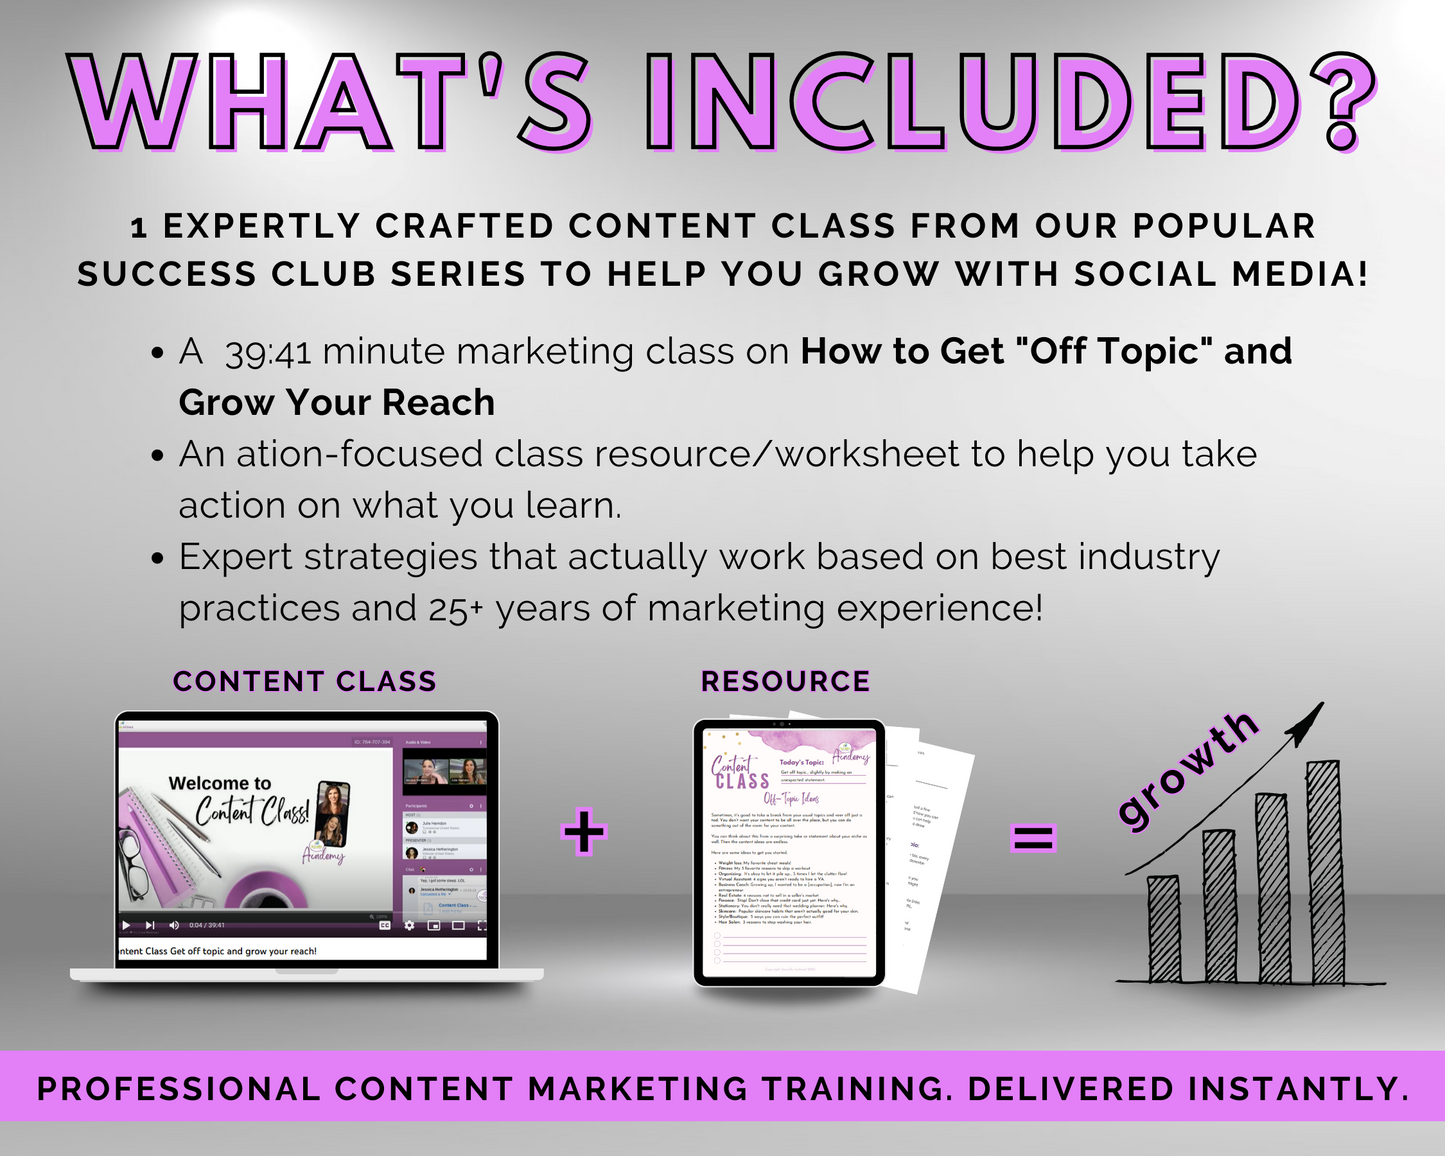 Content Class - How to Get "Off Topic" and Grow Your Reach Masterclass